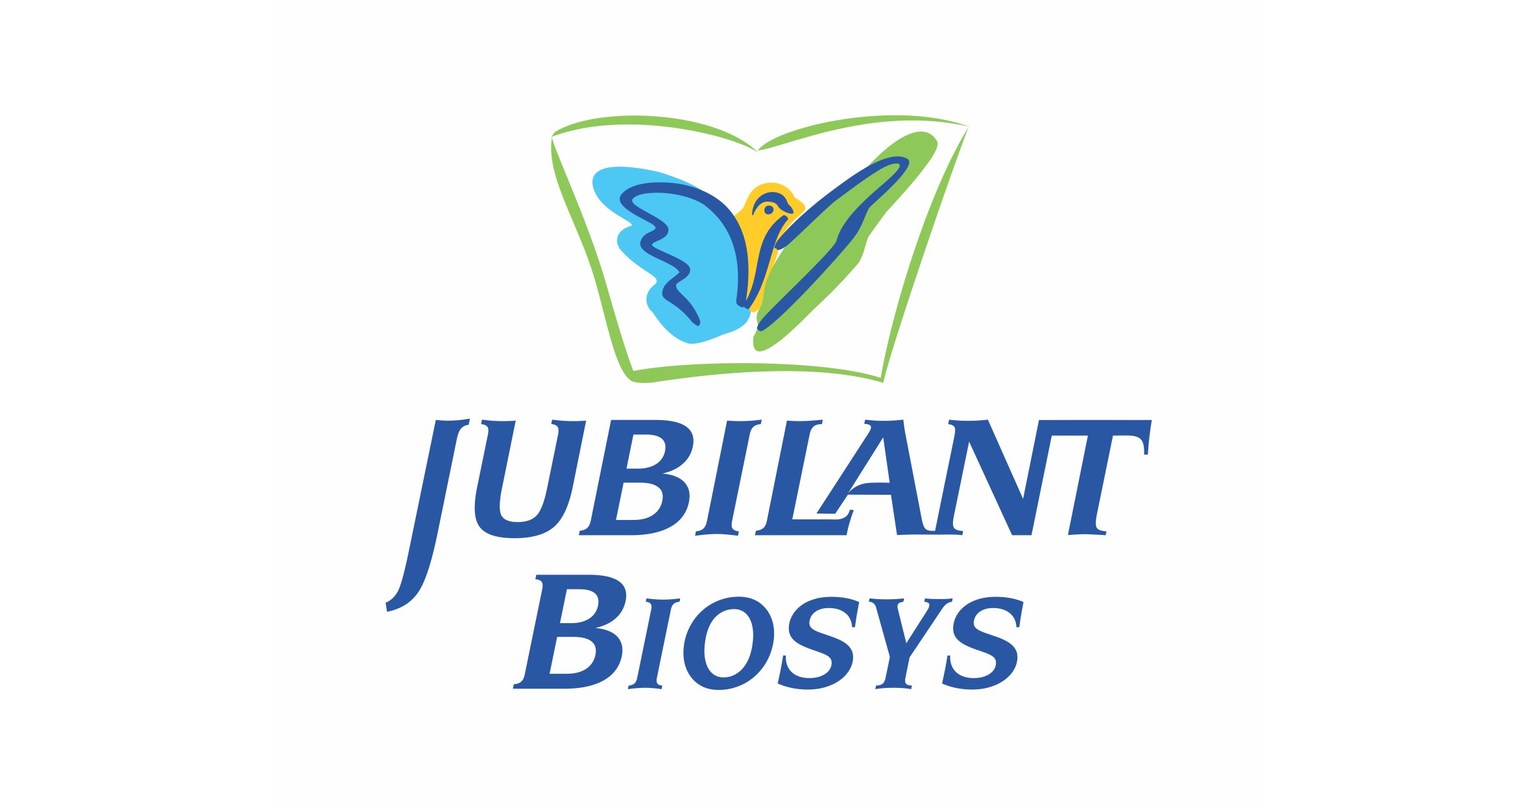 Jubilant Biosys Limited announces the merger with Jubilant Chemsys Limited